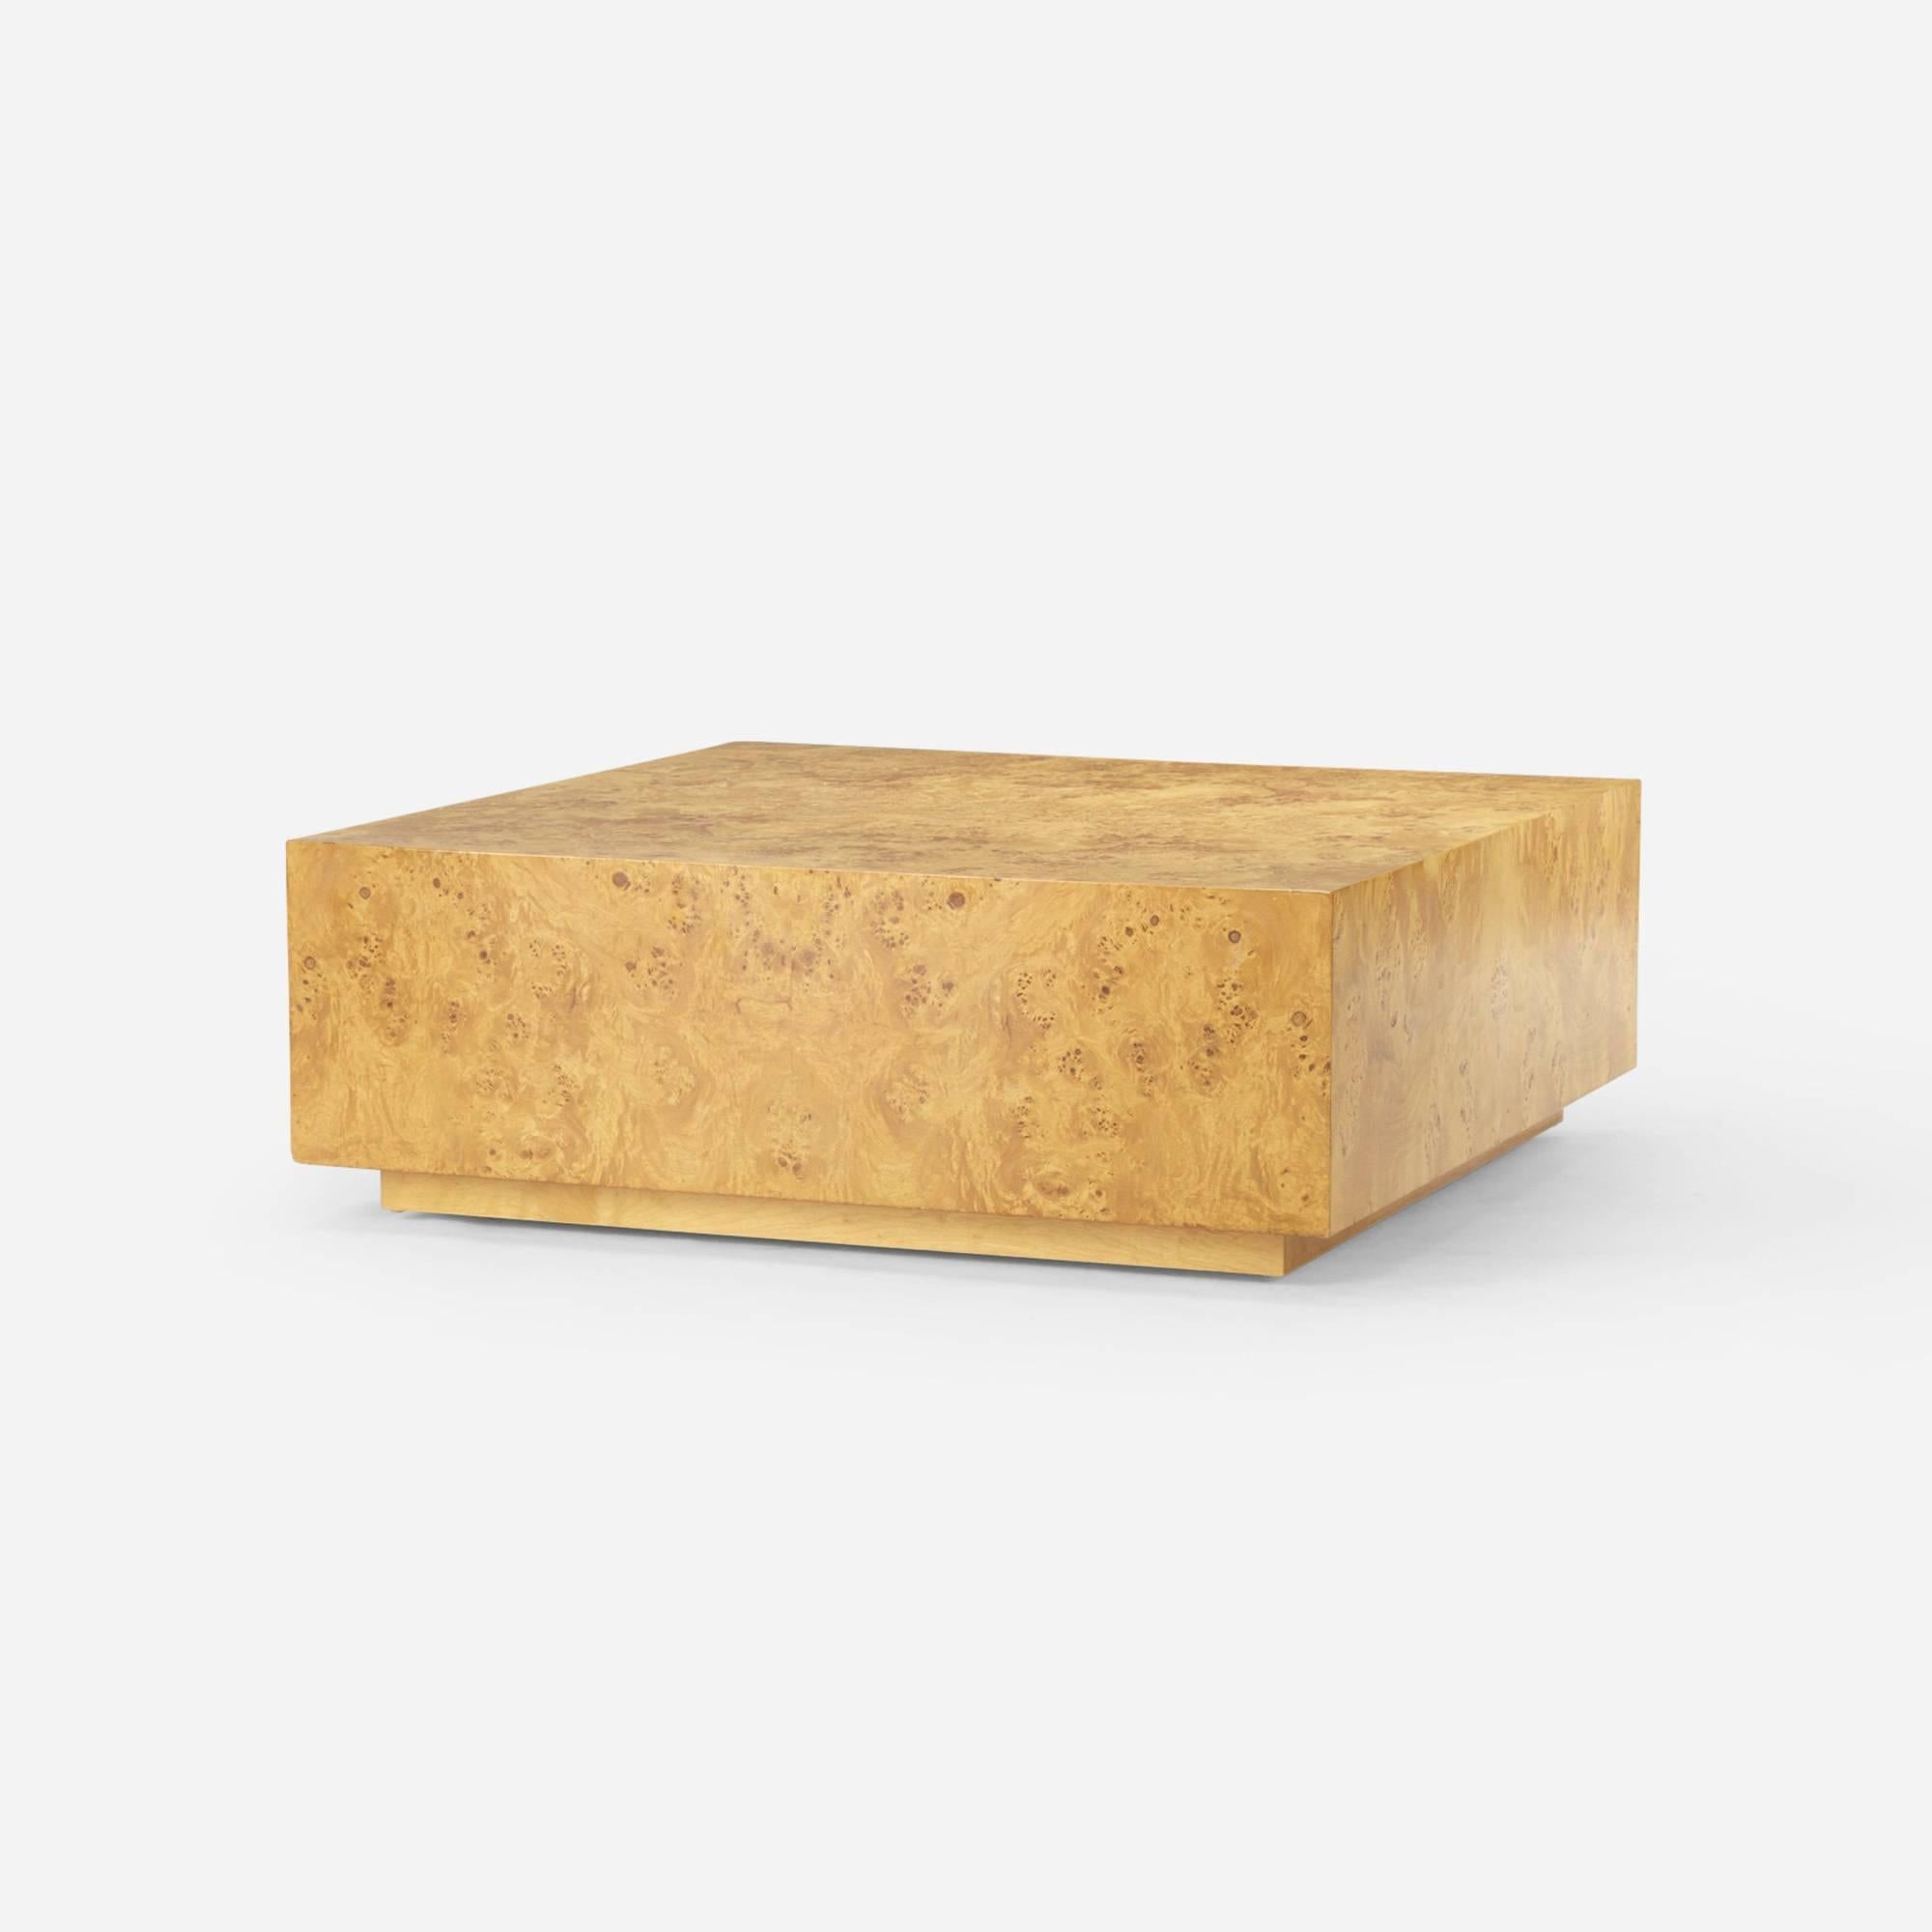 Wonderfully Minimalist, burl coffee table by Milo Baughman. A quiet player in any modern interior, this stabile, large square design can be loaded up with accessories and books or left to display its simple beauty.